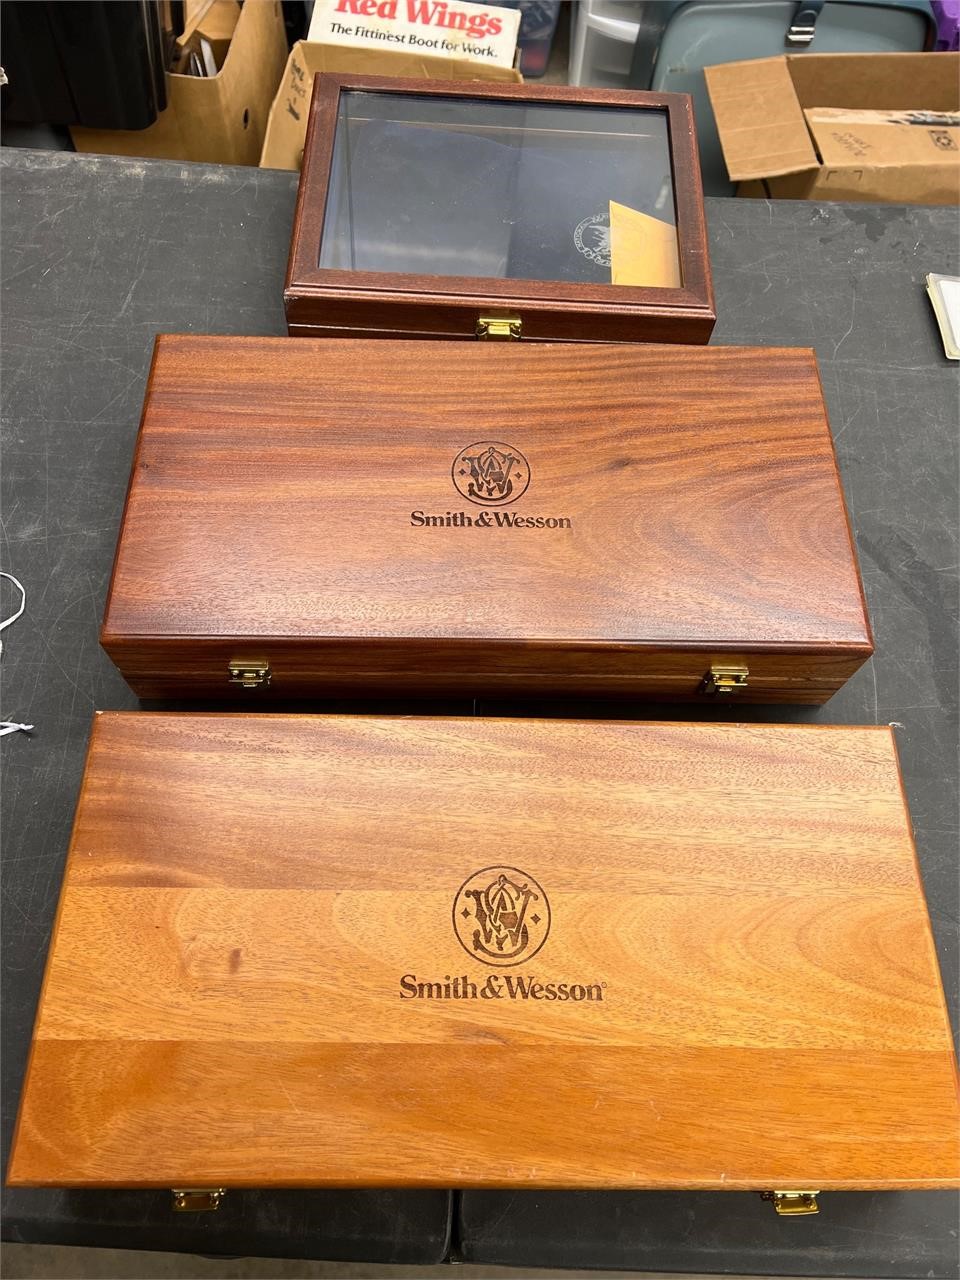 Smith & Wesson  wood  display boxes